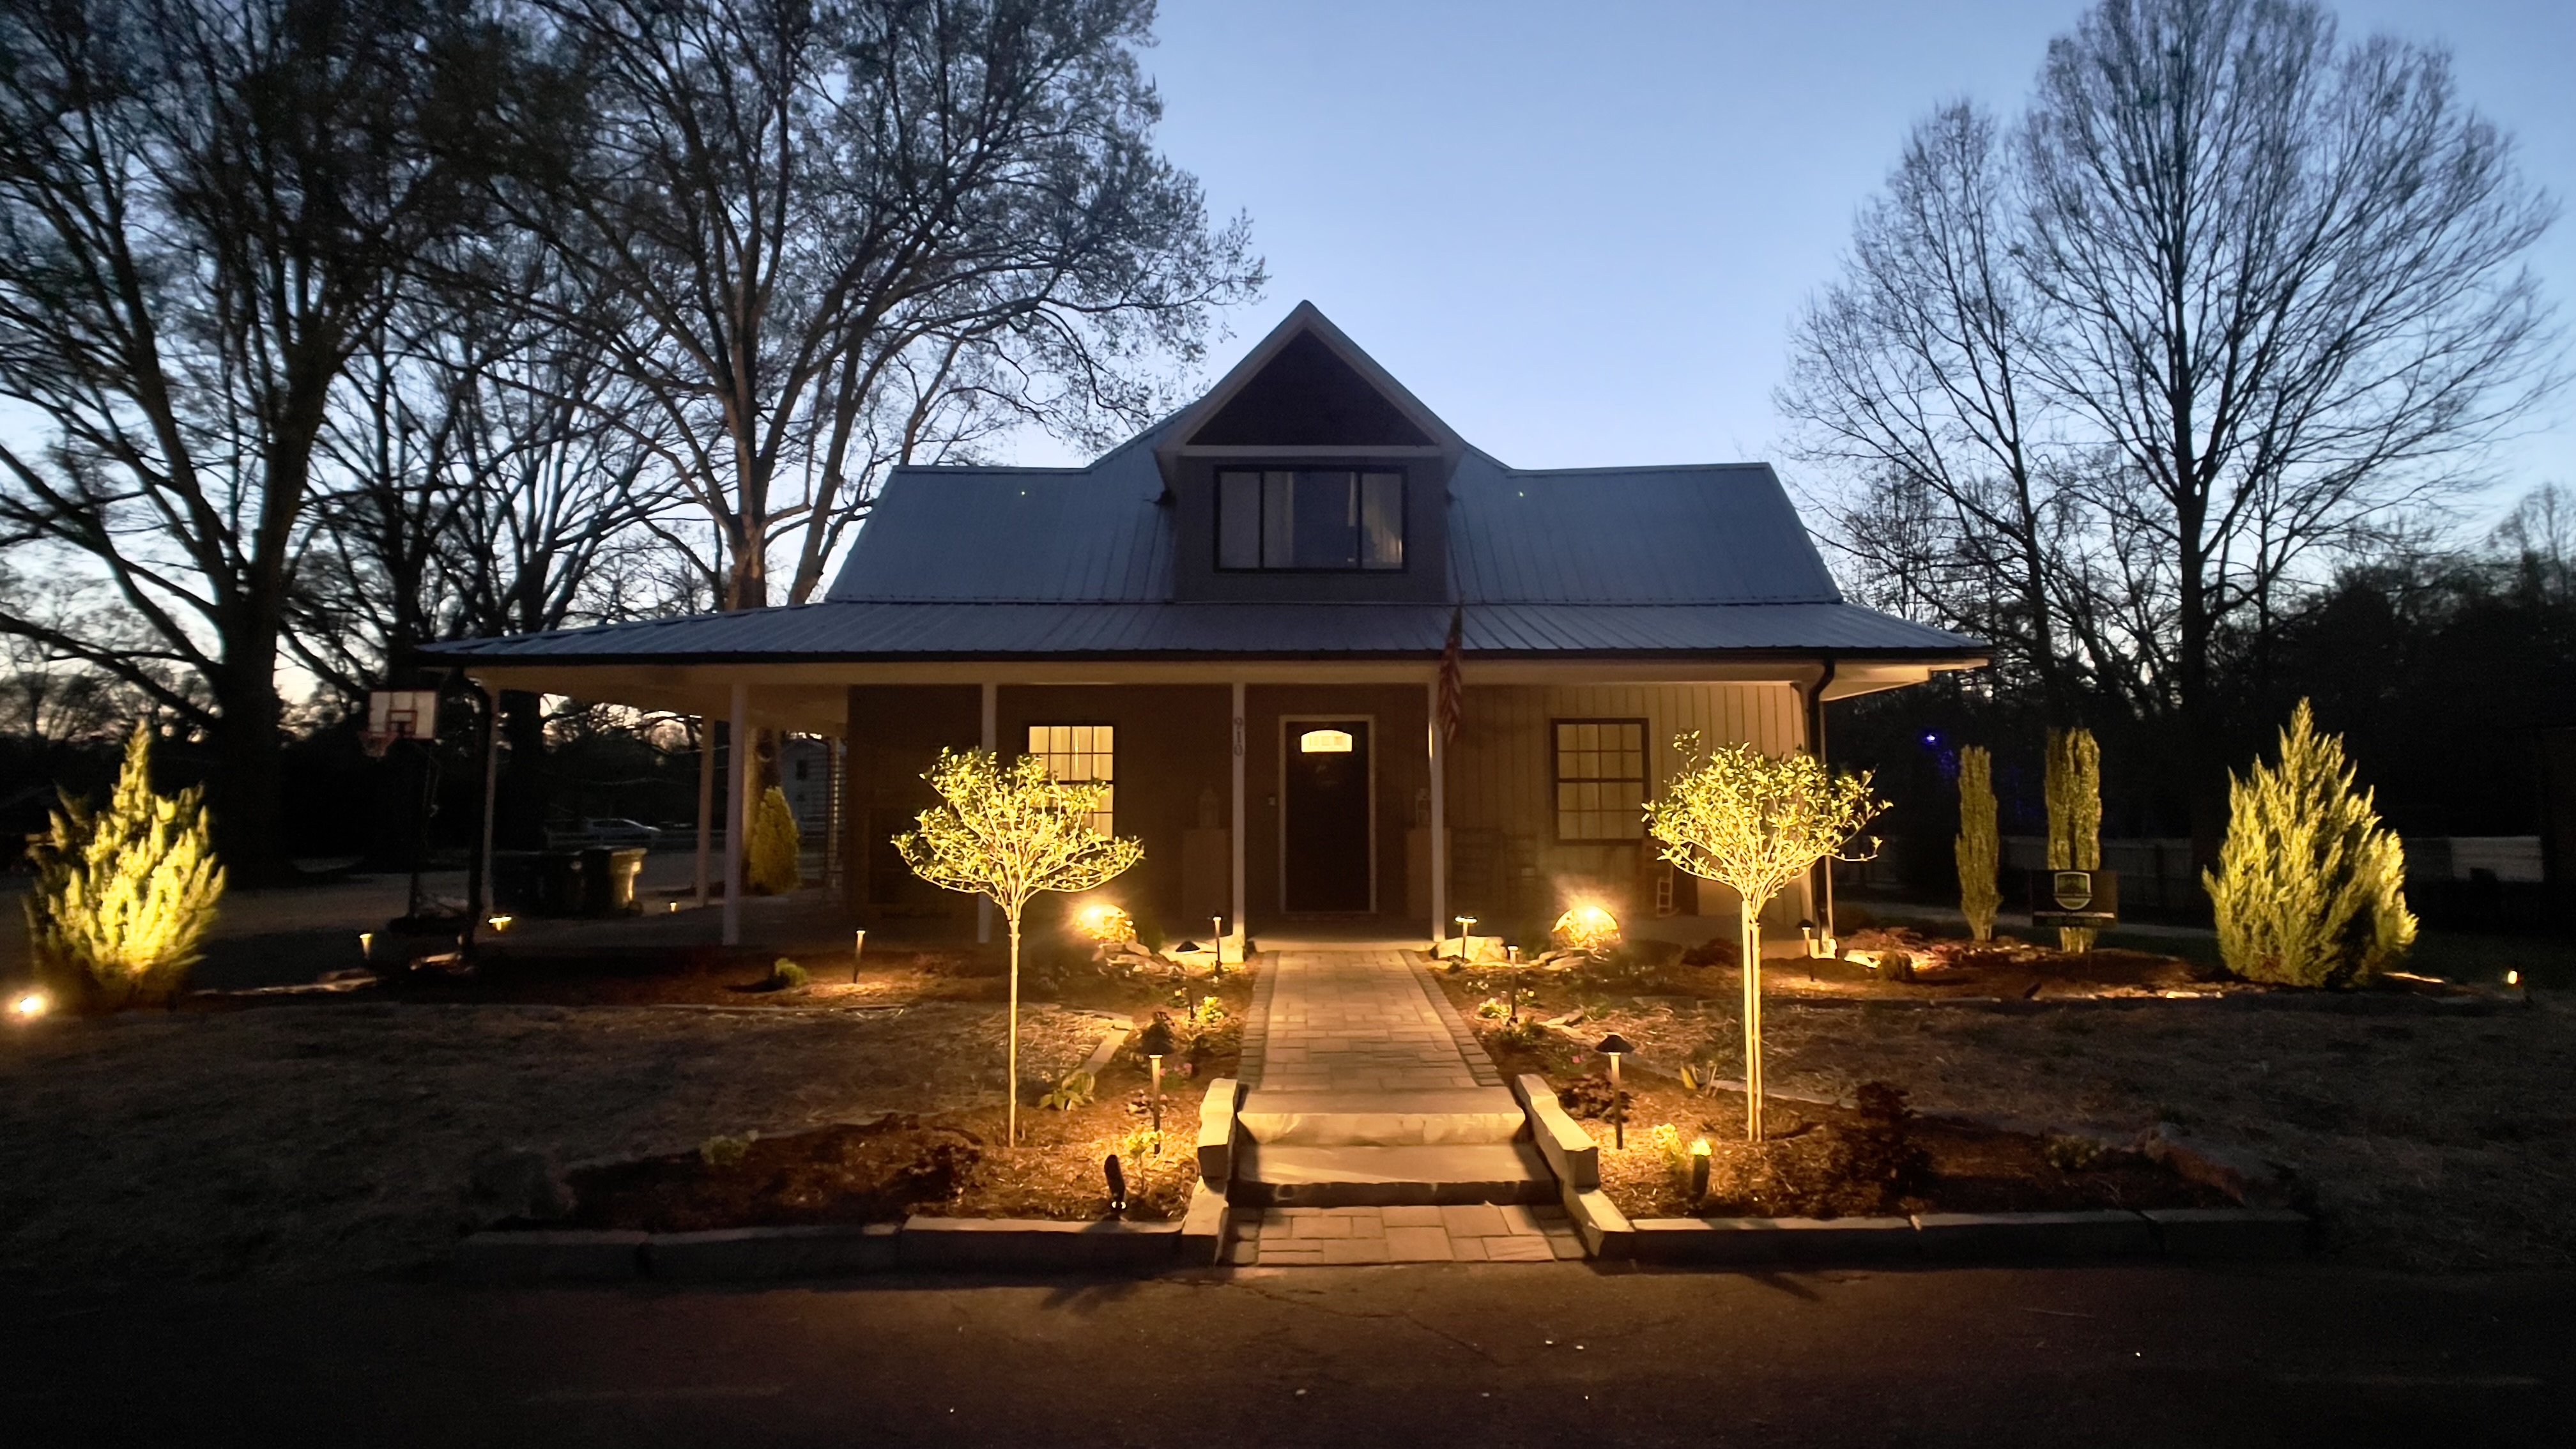 A home is photographed at dusk with additional uplighting on